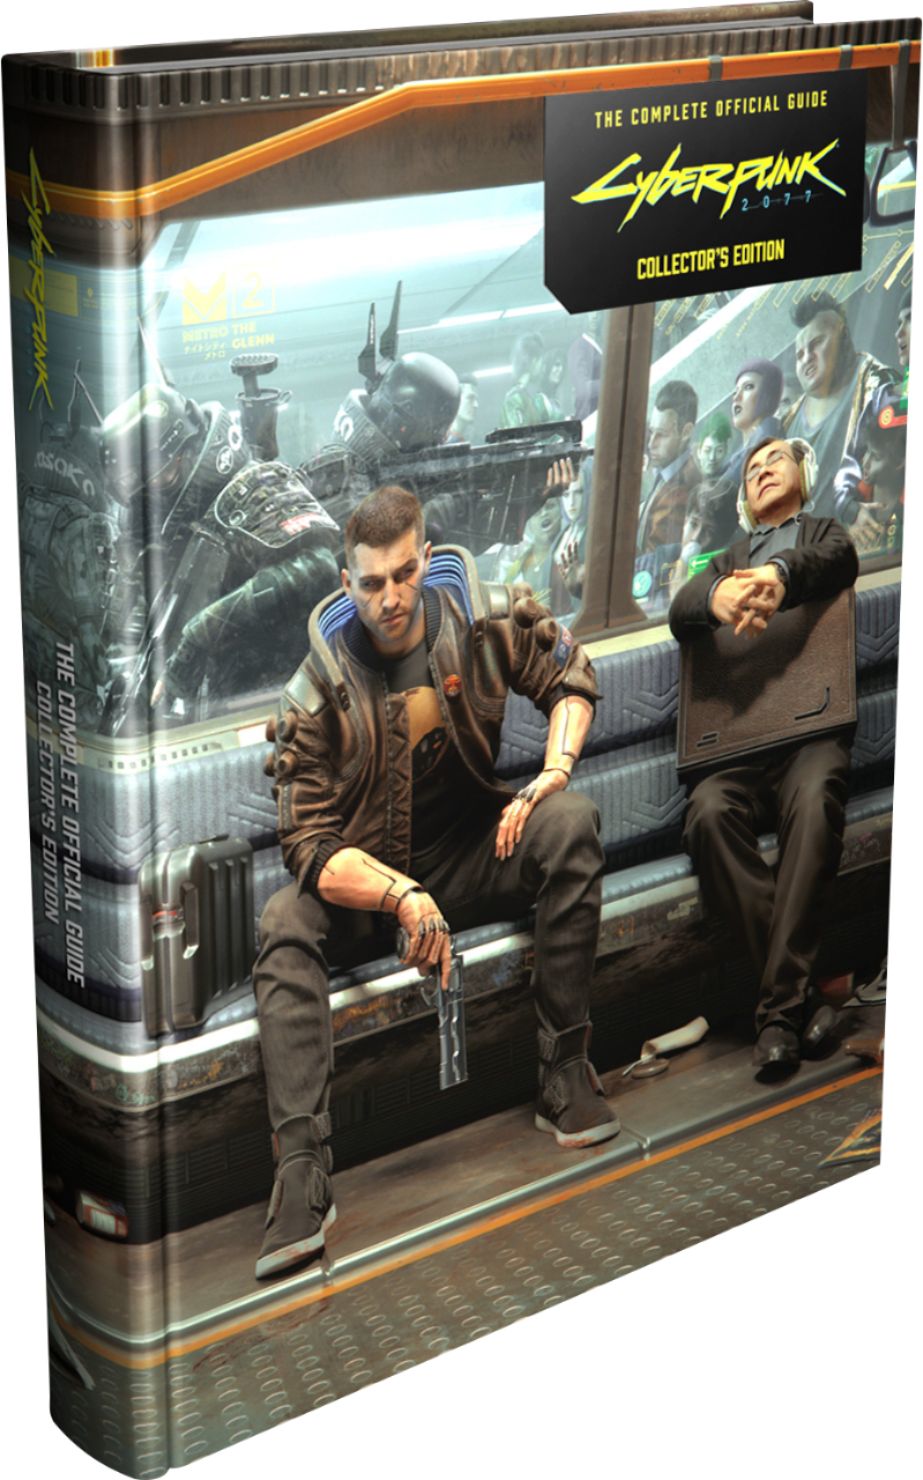 Piggyback Cyberpunk 2077 The Complete Official Guide  - Best Buy